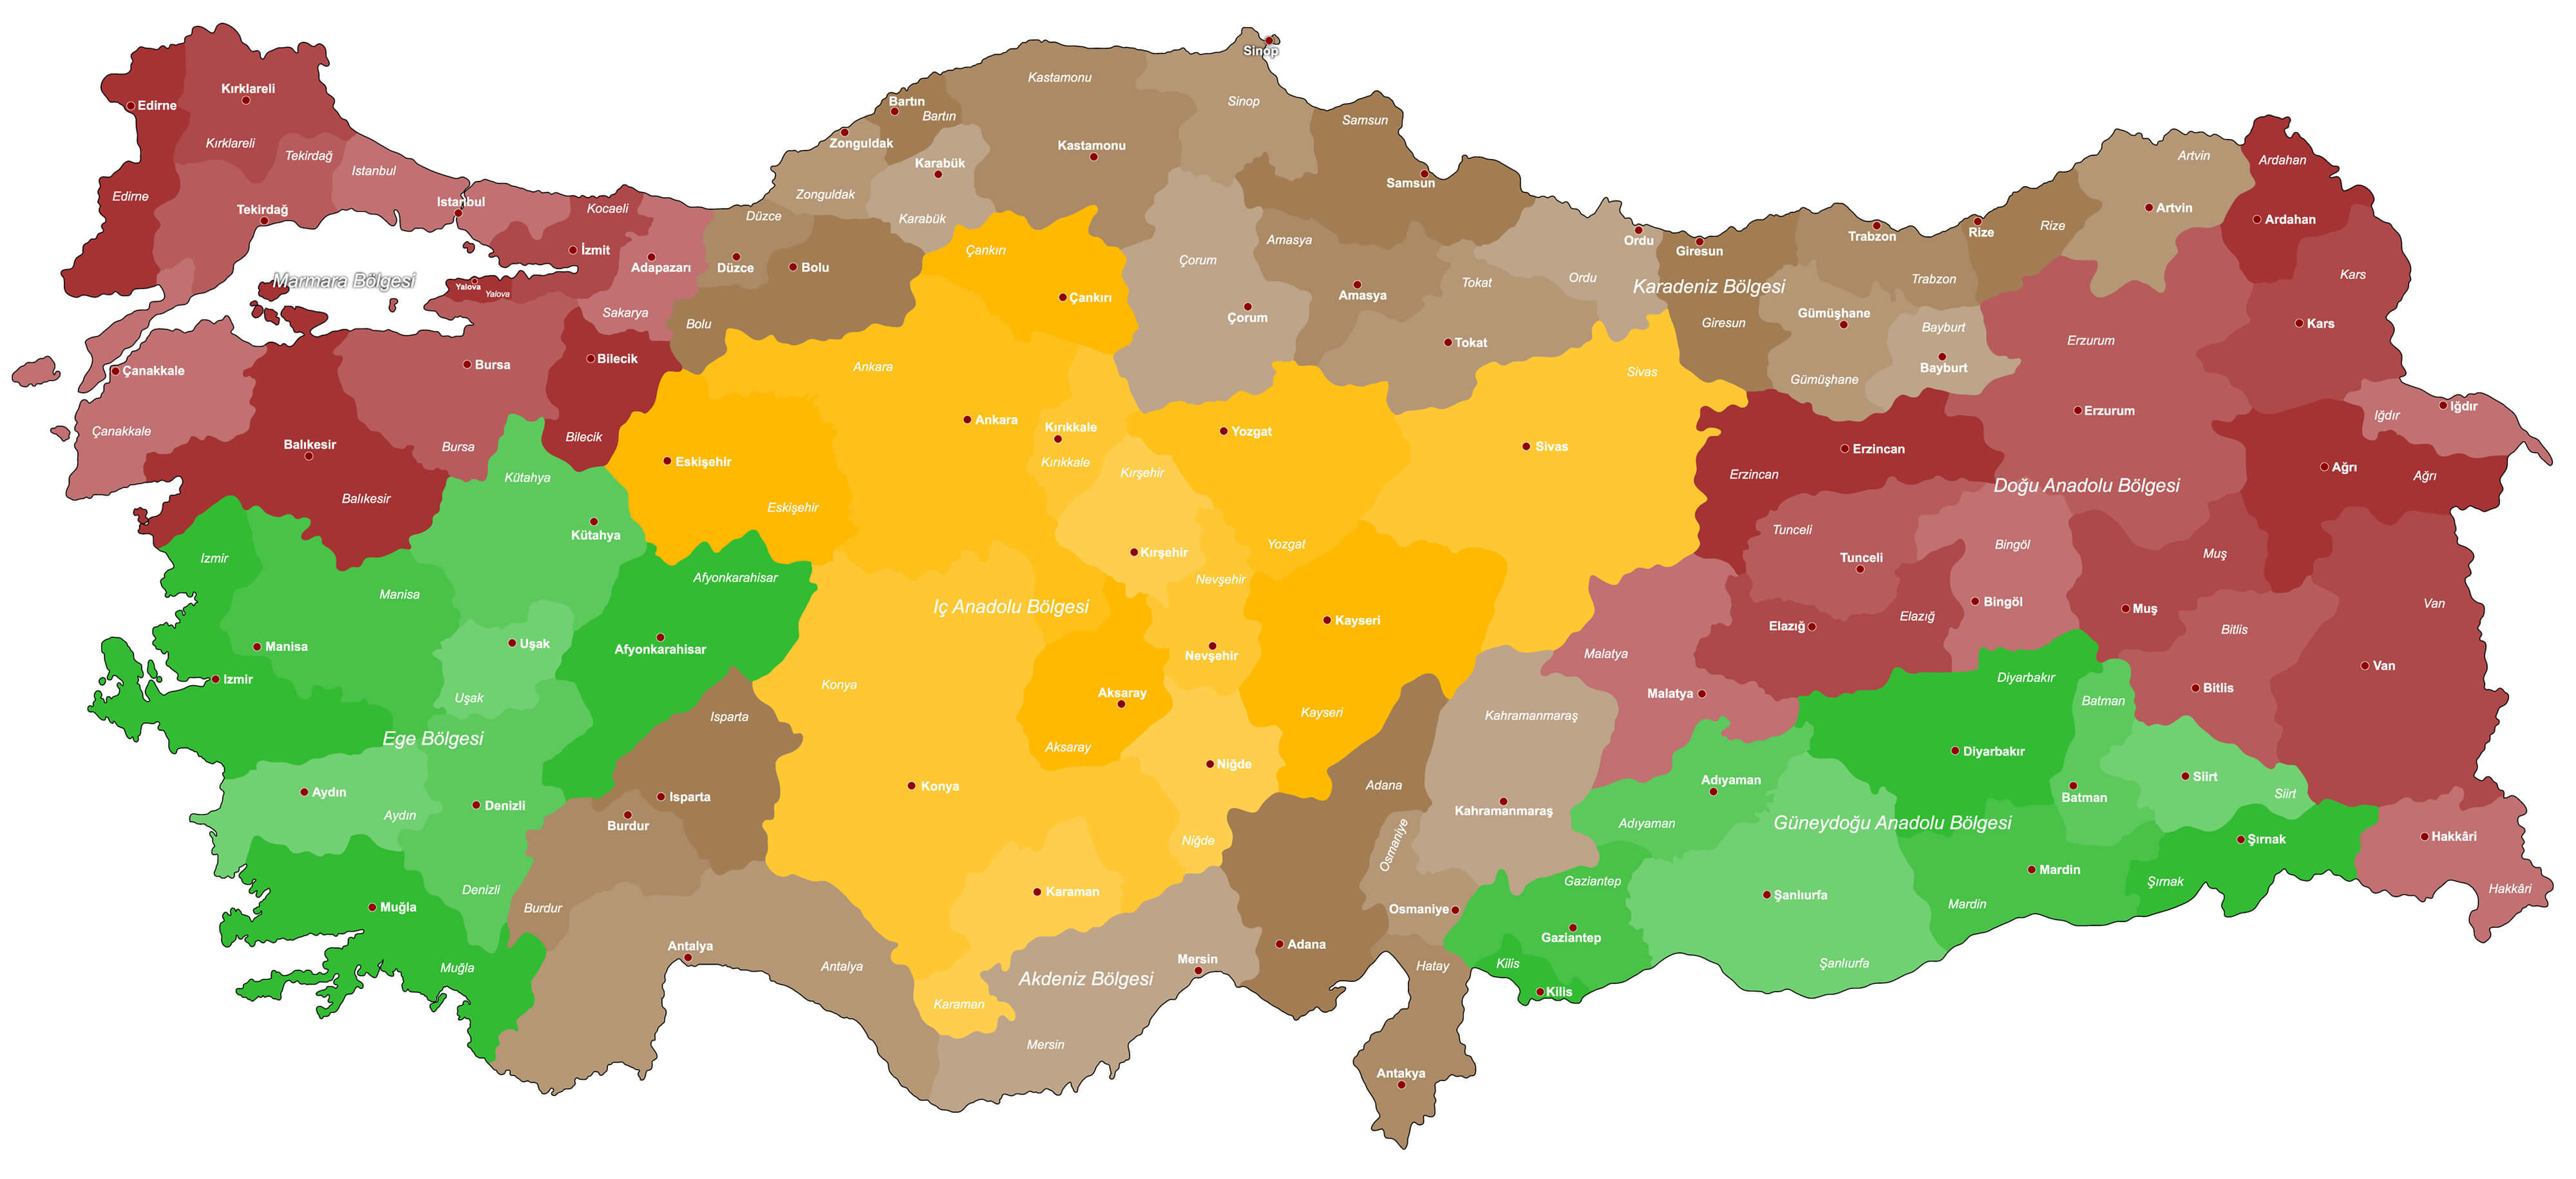 Map of Turkey Guide of the World